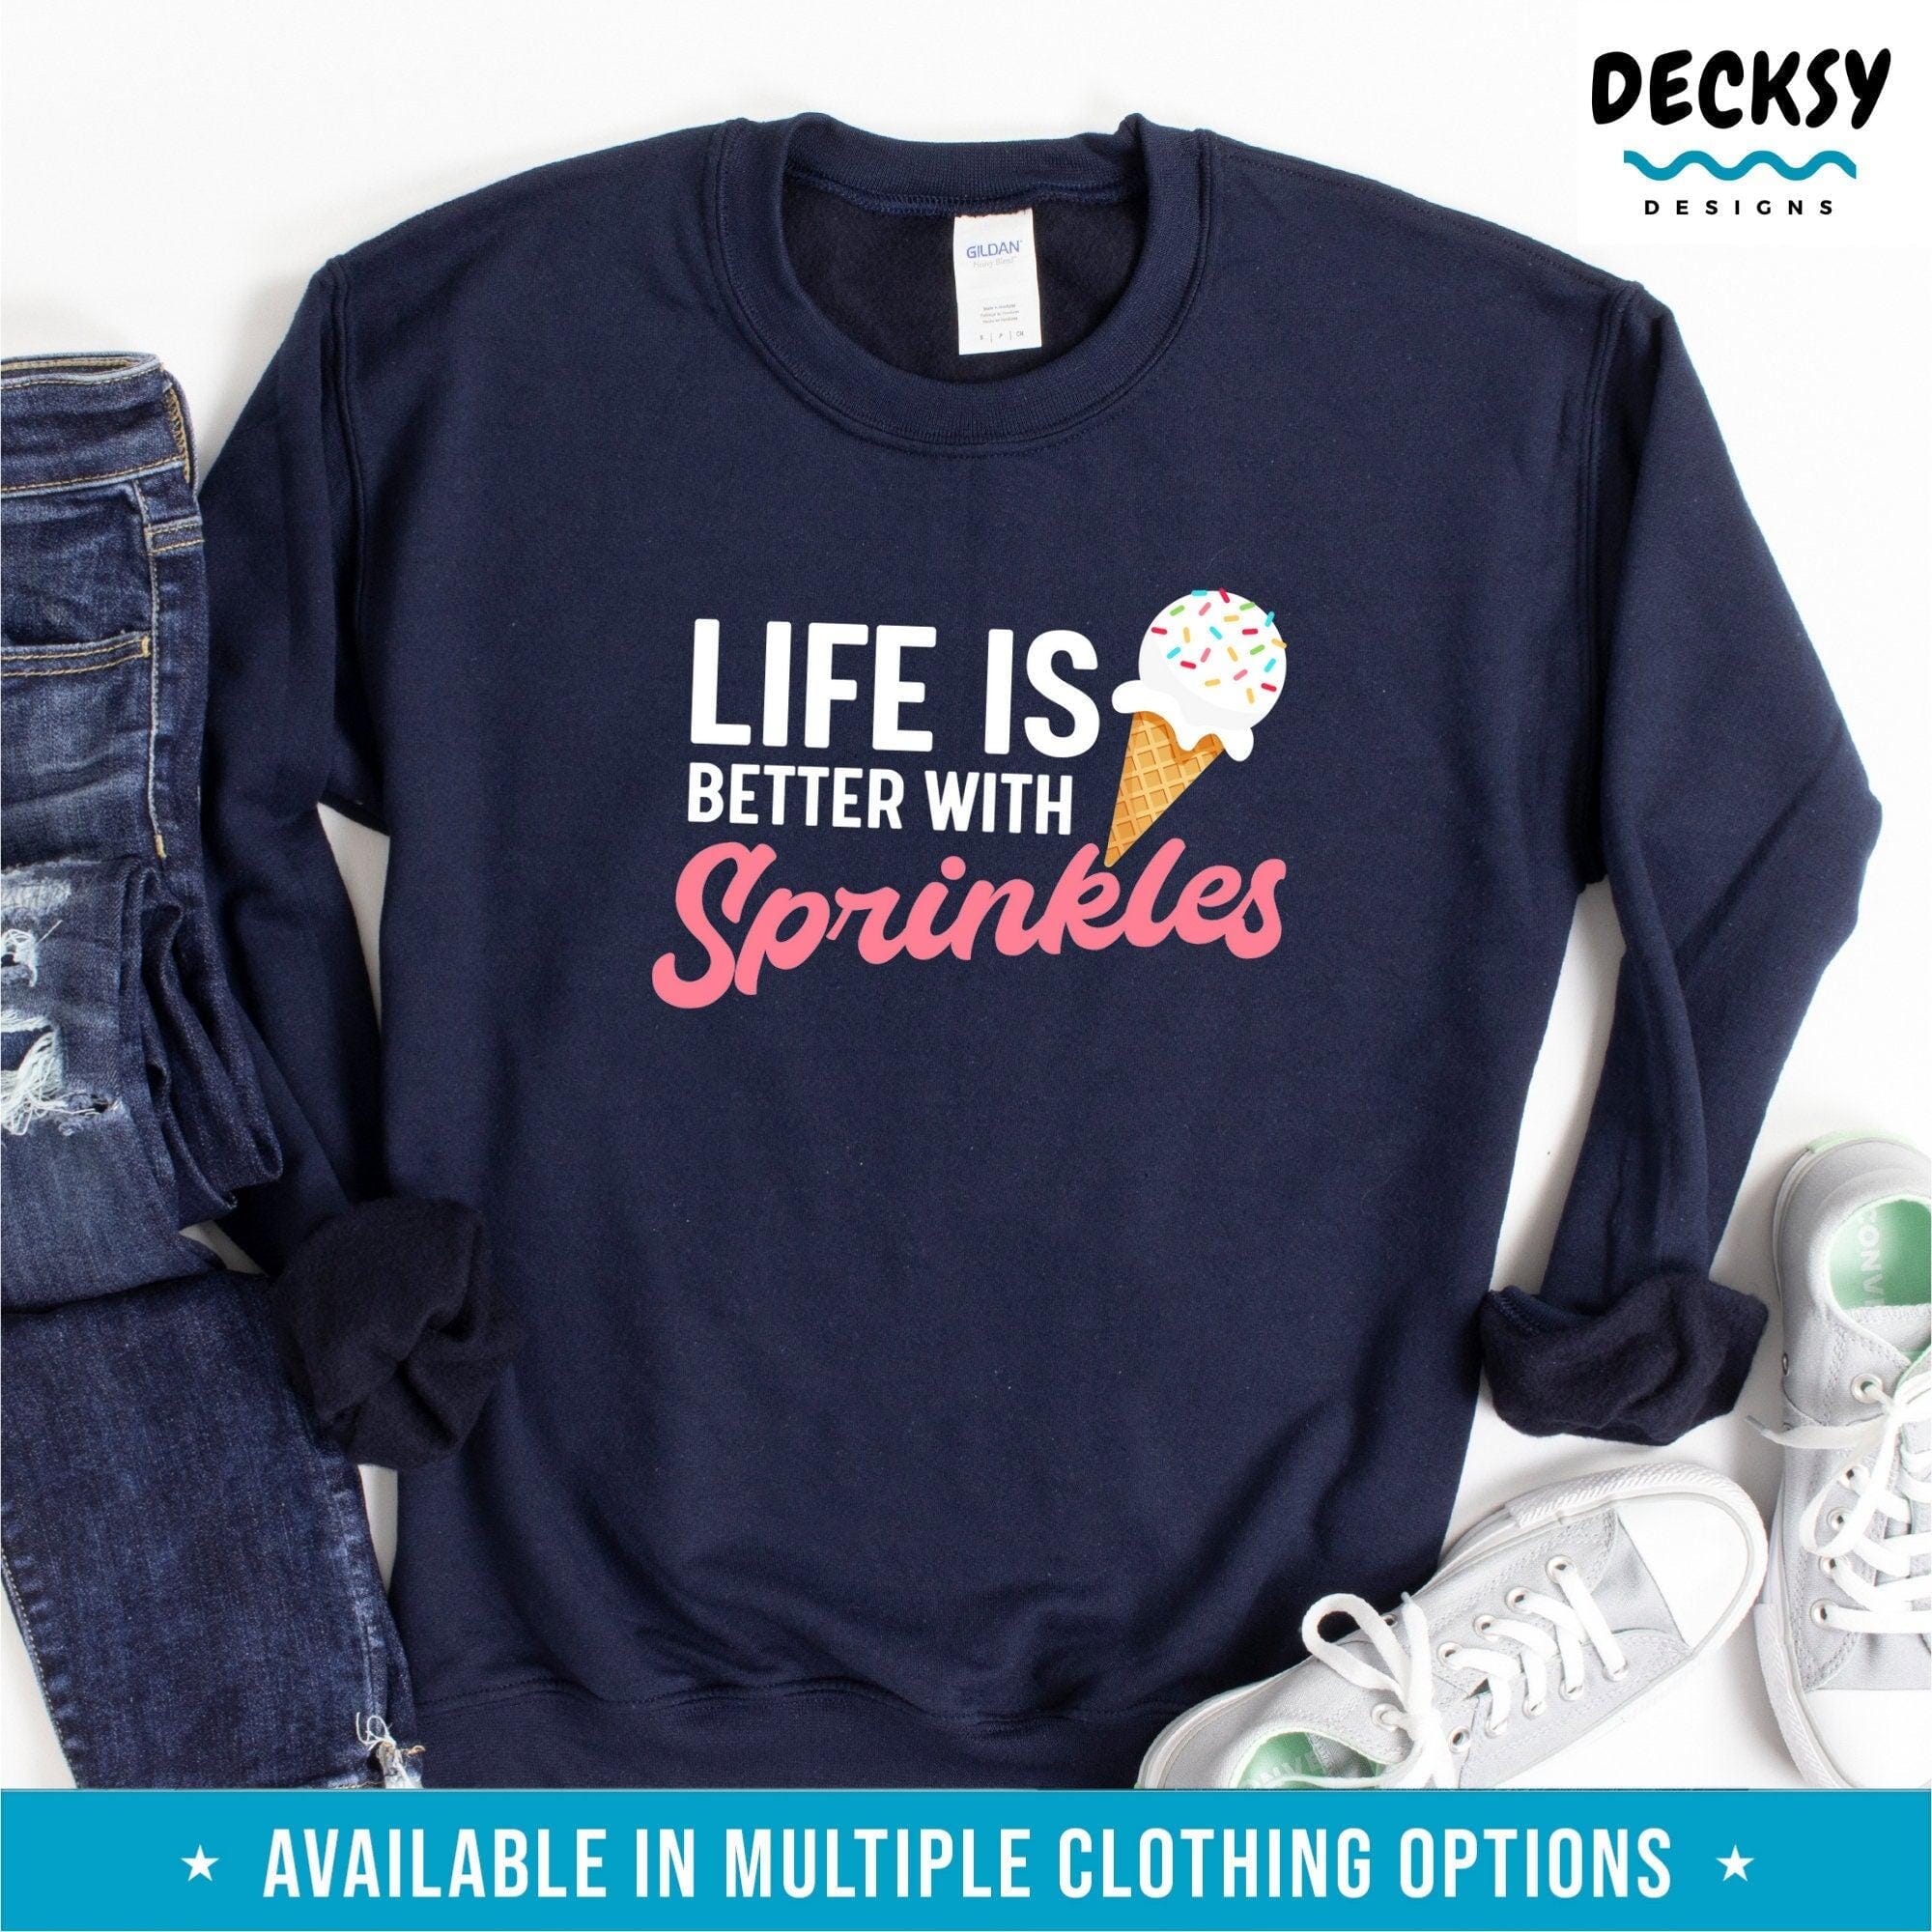 Ice Cream T Shirt, Positive Vibes Gift-Clothing:Gender-Neutral Adult Clothing:Tops & Tees:T-shirts:Graphic Tees-DecksyDesigns